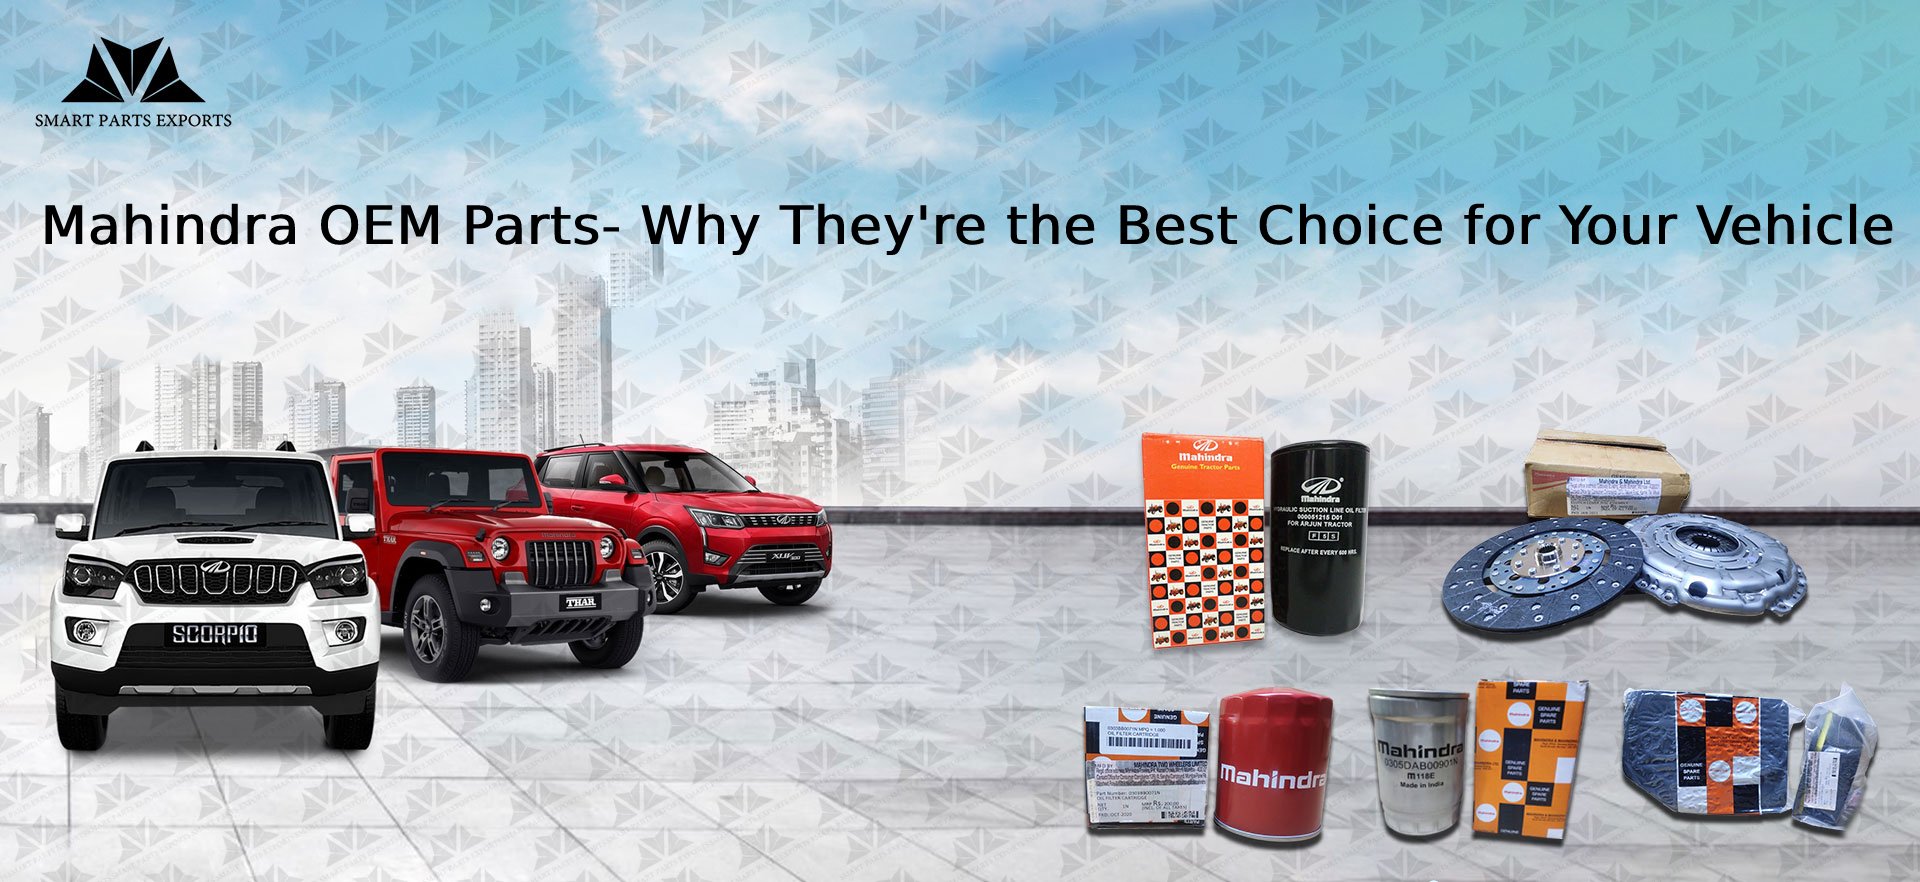 Mahindra Spare parts and Accessories : Smart Parts exports